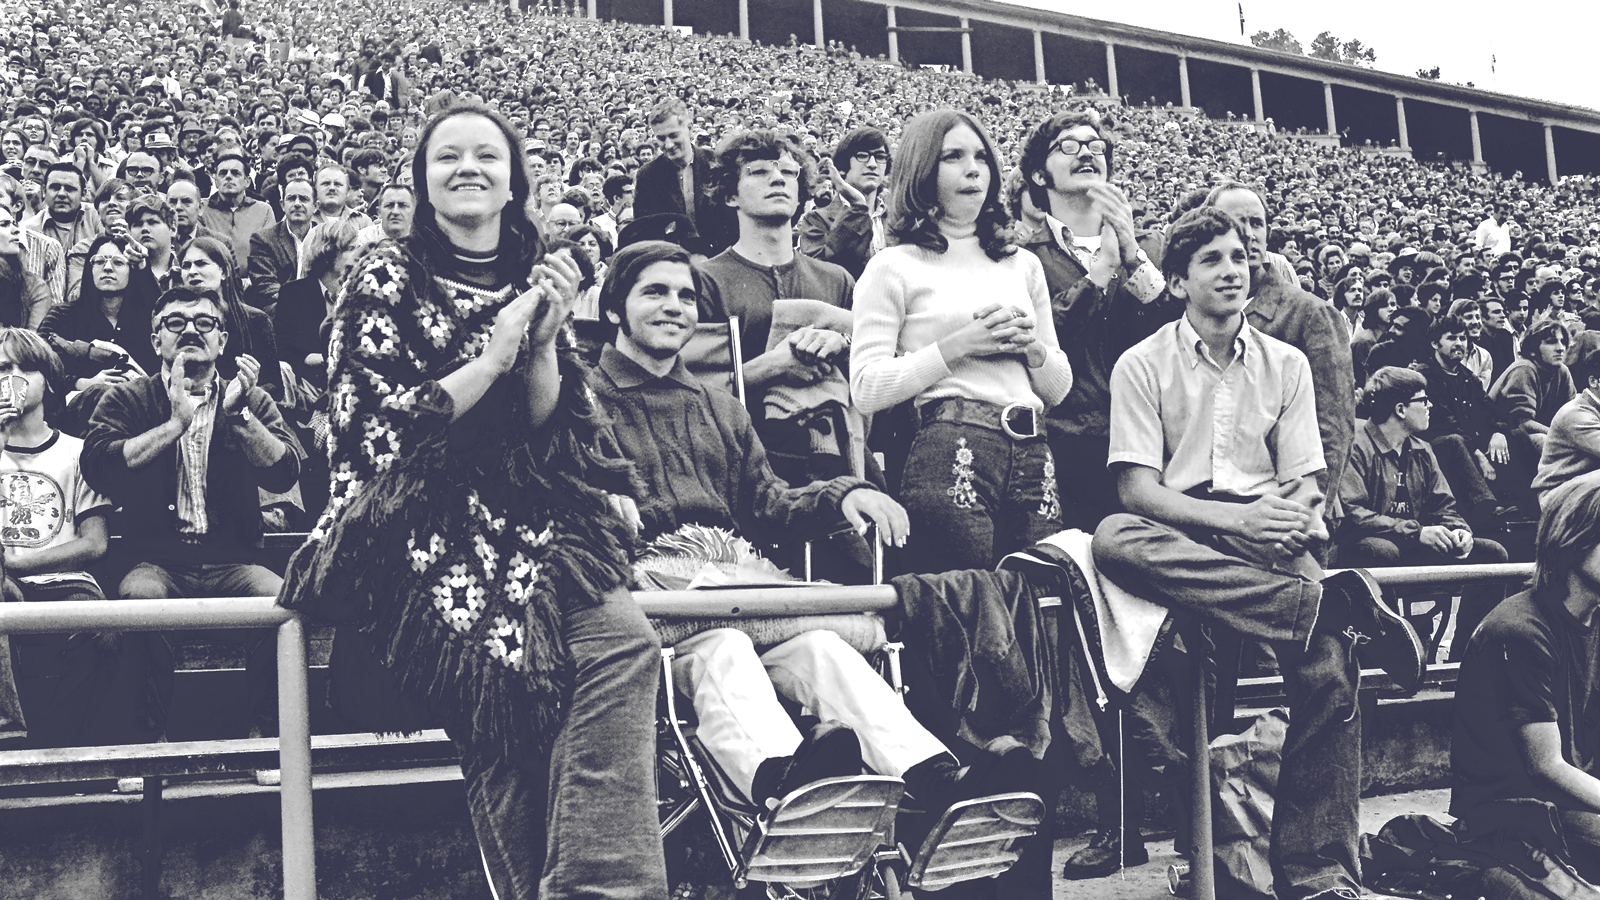 A paralyzed man in a wheelchair attends a college football game surrounded by other spectators.